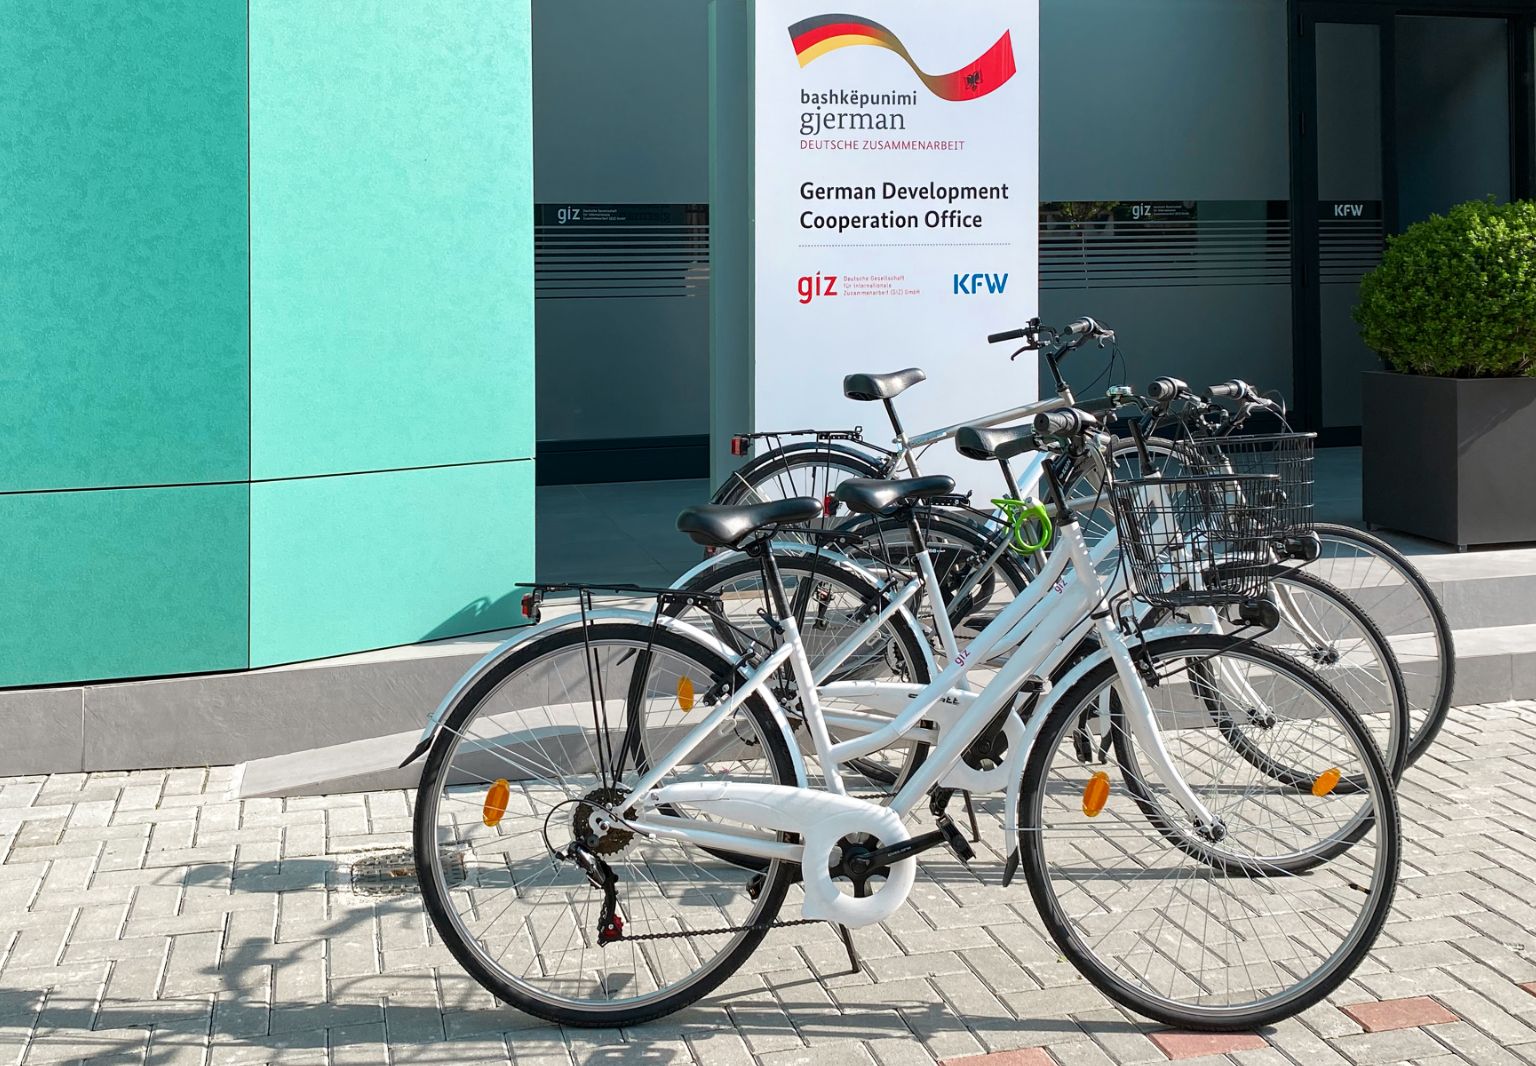 Photo: Several bicycles standing side by side in front of a building with a sign: "German Development Cooperation Office".